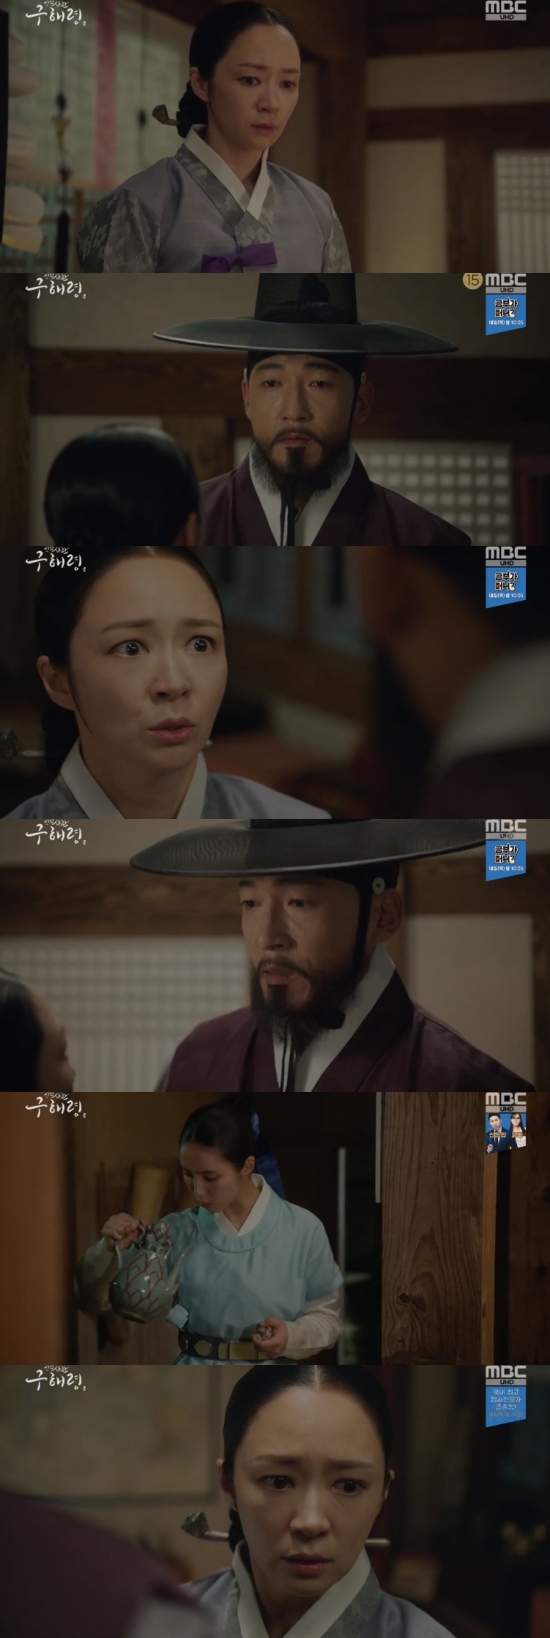 It has been revealed that newcomer Rookie Historian Goo Hae-ryung Shin Se-kyung and Fair Exchange are not pro-brothers.In the 25th and 26th MBC drama Rookie Historian Goo Hae-ryung broadcasted on the 28th, Mohwa (Jeon Ik-ryong) was depicted in questioning Koo Jae-kyung (Fair exchange)On this day, Mohwa found Koo Jae-kyungs house but turned around without knocking on the door. At this time, Rookie Historian Goo Hae-ryung appeared, Madame? Yes.I was so worried that he disappeared suddenly. Is everything okay? How do you meet here? In particular, Rookie Historian Goo Hae-ryung said, This is my house. I guess Im not connected to her. Go in.Ill treat you something, he said, grabbing the motto.Koo Jae-kyung then returned home and asked, Did your guest come? Rookie Historian Goo Hae-ryung said, You are not just a guest, you are a very precious guest.Please come and say hello to your brother. Koo Jae-kyung went into the room of Rookie Historian Goo Hae-ryung.Rookie Historian Goo Hae-ryung said, You are the lady who helped me in Pyongan province, but I met right here.It is amazing, said Koo Jae-kyung, who pretended not to know the mother and asked Rookie Historian Goo Hae-ryung to bring alcohol from his room.Mohwa said, When Rookie Historian Goo Hae-ryung left, I had a sister.When did you start to die before you were born and your family was only a sick mother?At this time, Mohwa recalled the childhood story of Rookie Historian Goo Hae-ryung, That child is not your brother, what the hell are you thinking.Why are you doing this?Please pretend not to know. There is still work to be done. Please, even until then. Sister.Photo = MBC Broadcasting Screen